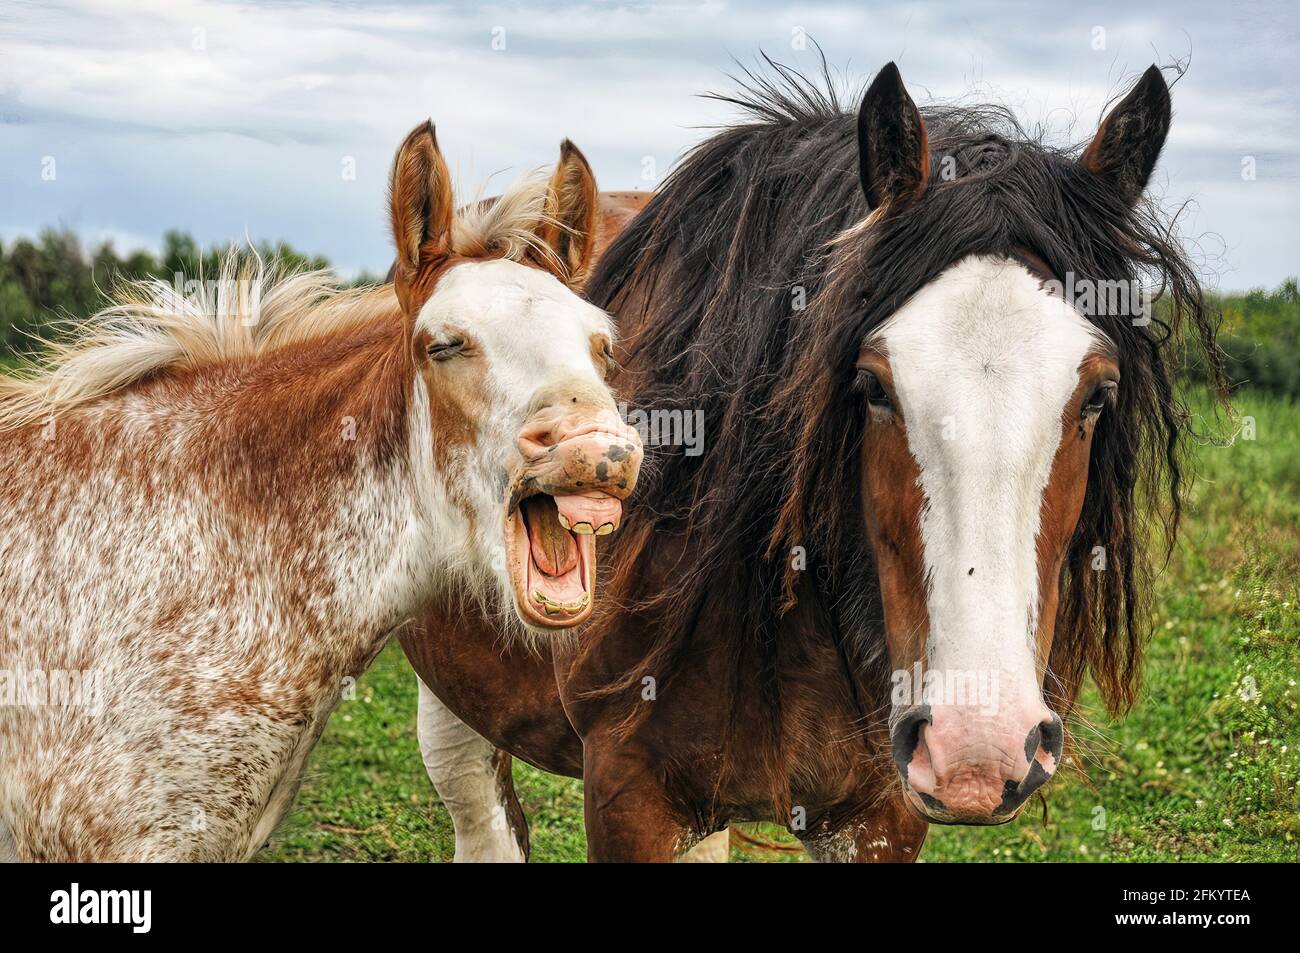 A young horse makes a funny face while its mother looks on Stock Photo